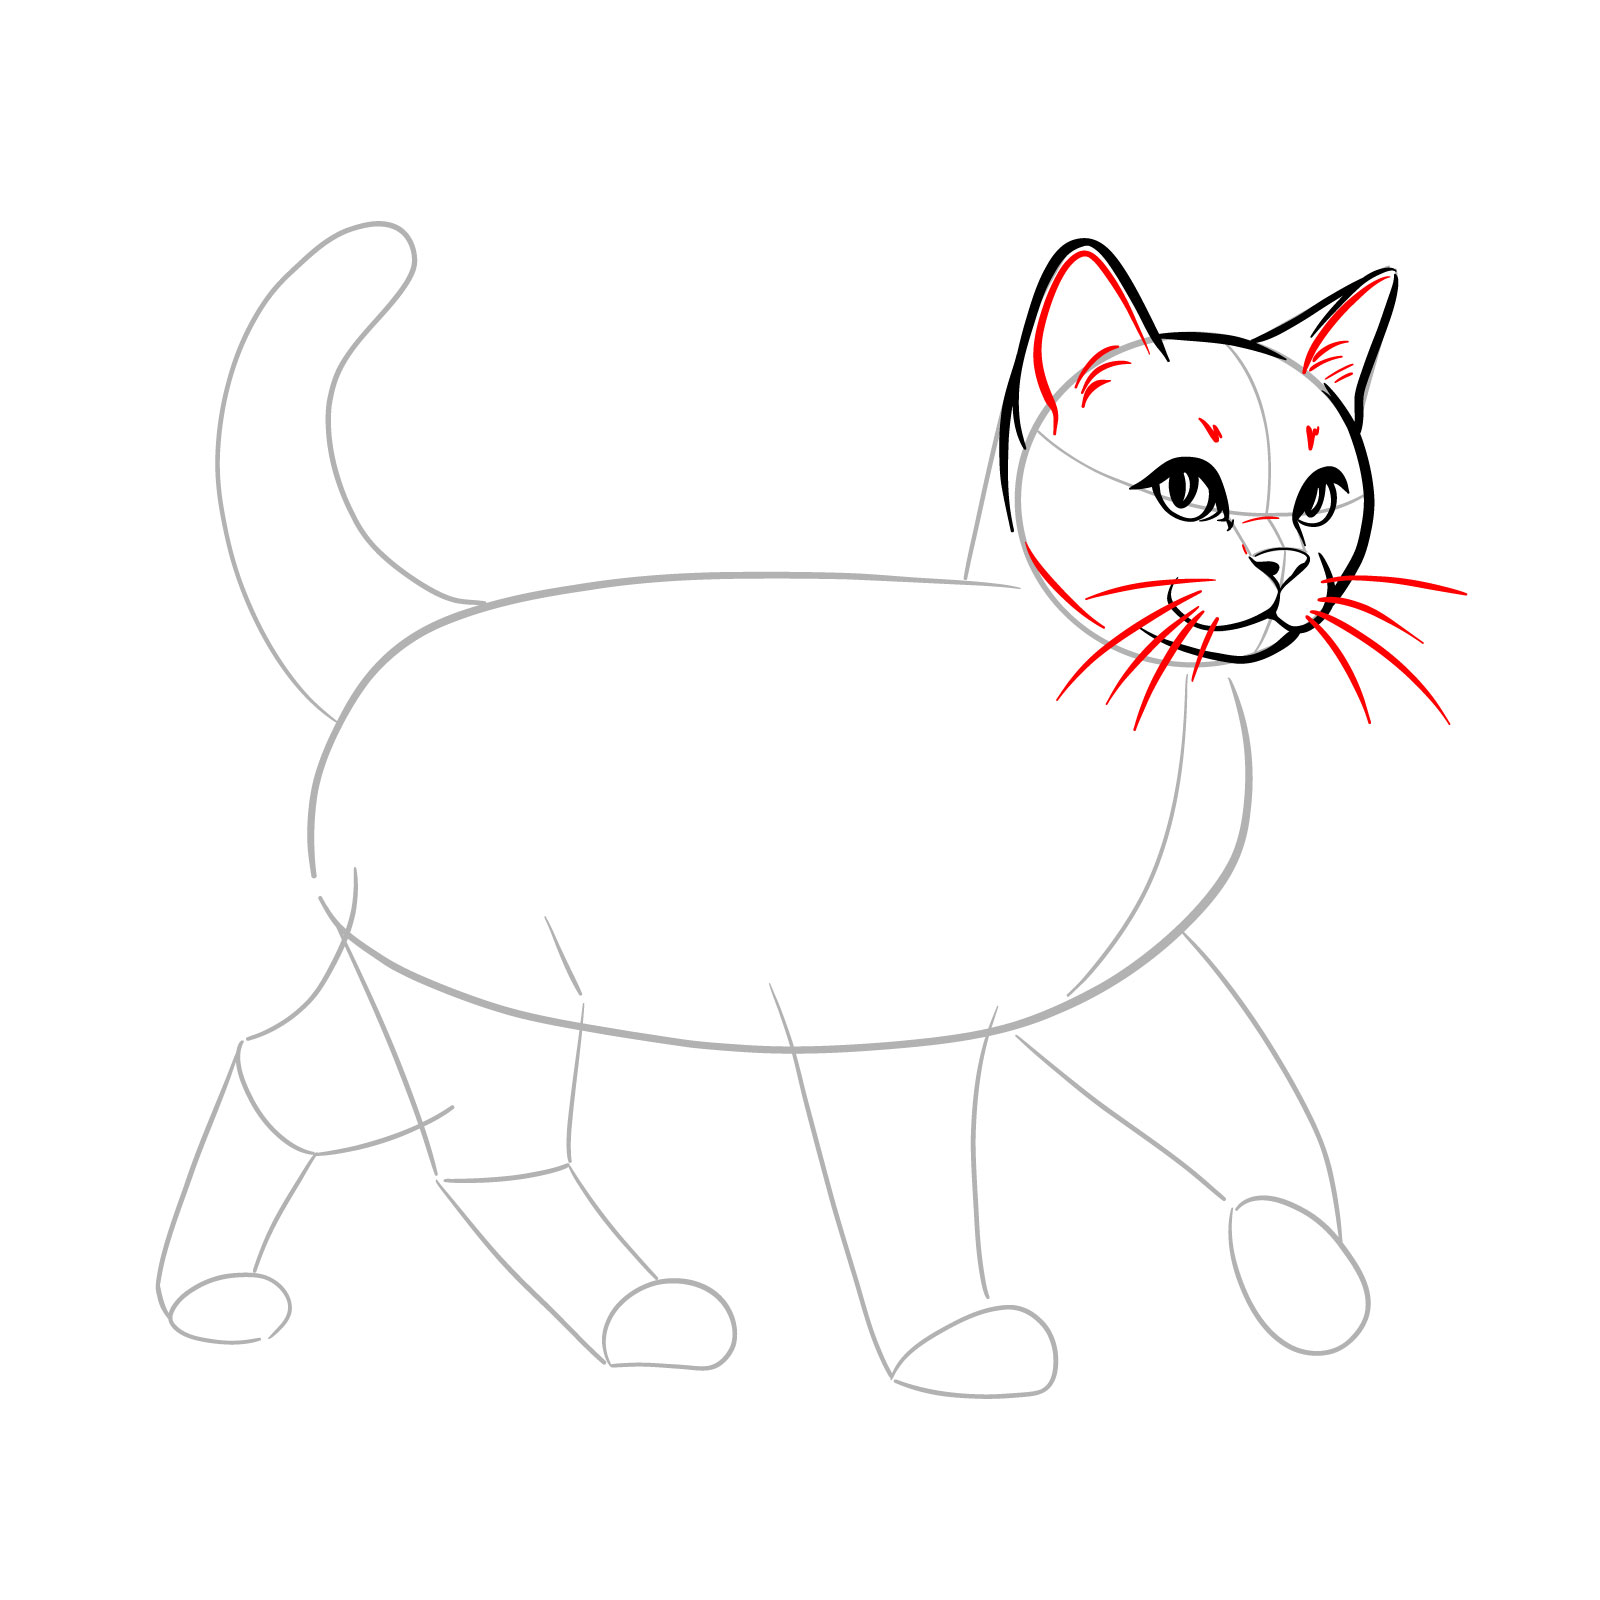 Detailing the cat's facial features with whiskers and ear refinement in a walking pose - step 07